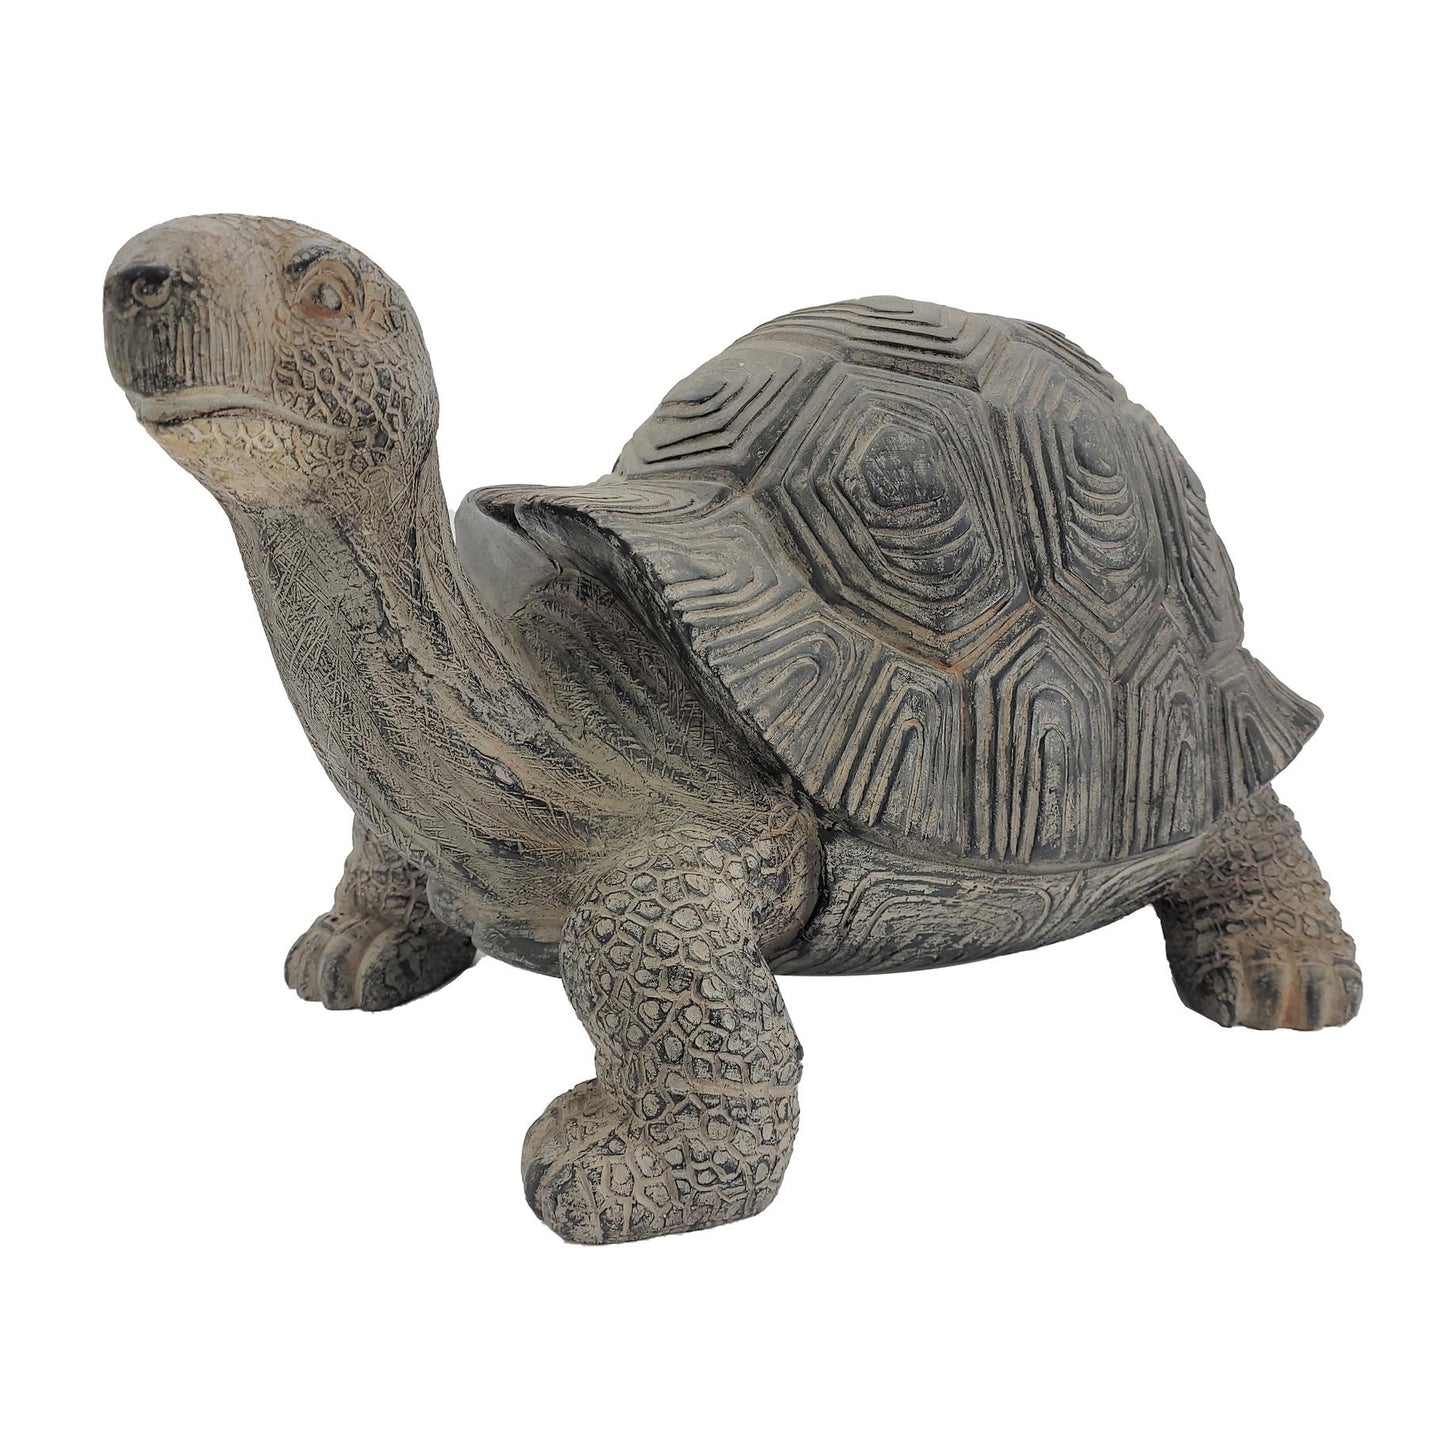 ON SALE NOW! Antique Polyresin Turtle Statue